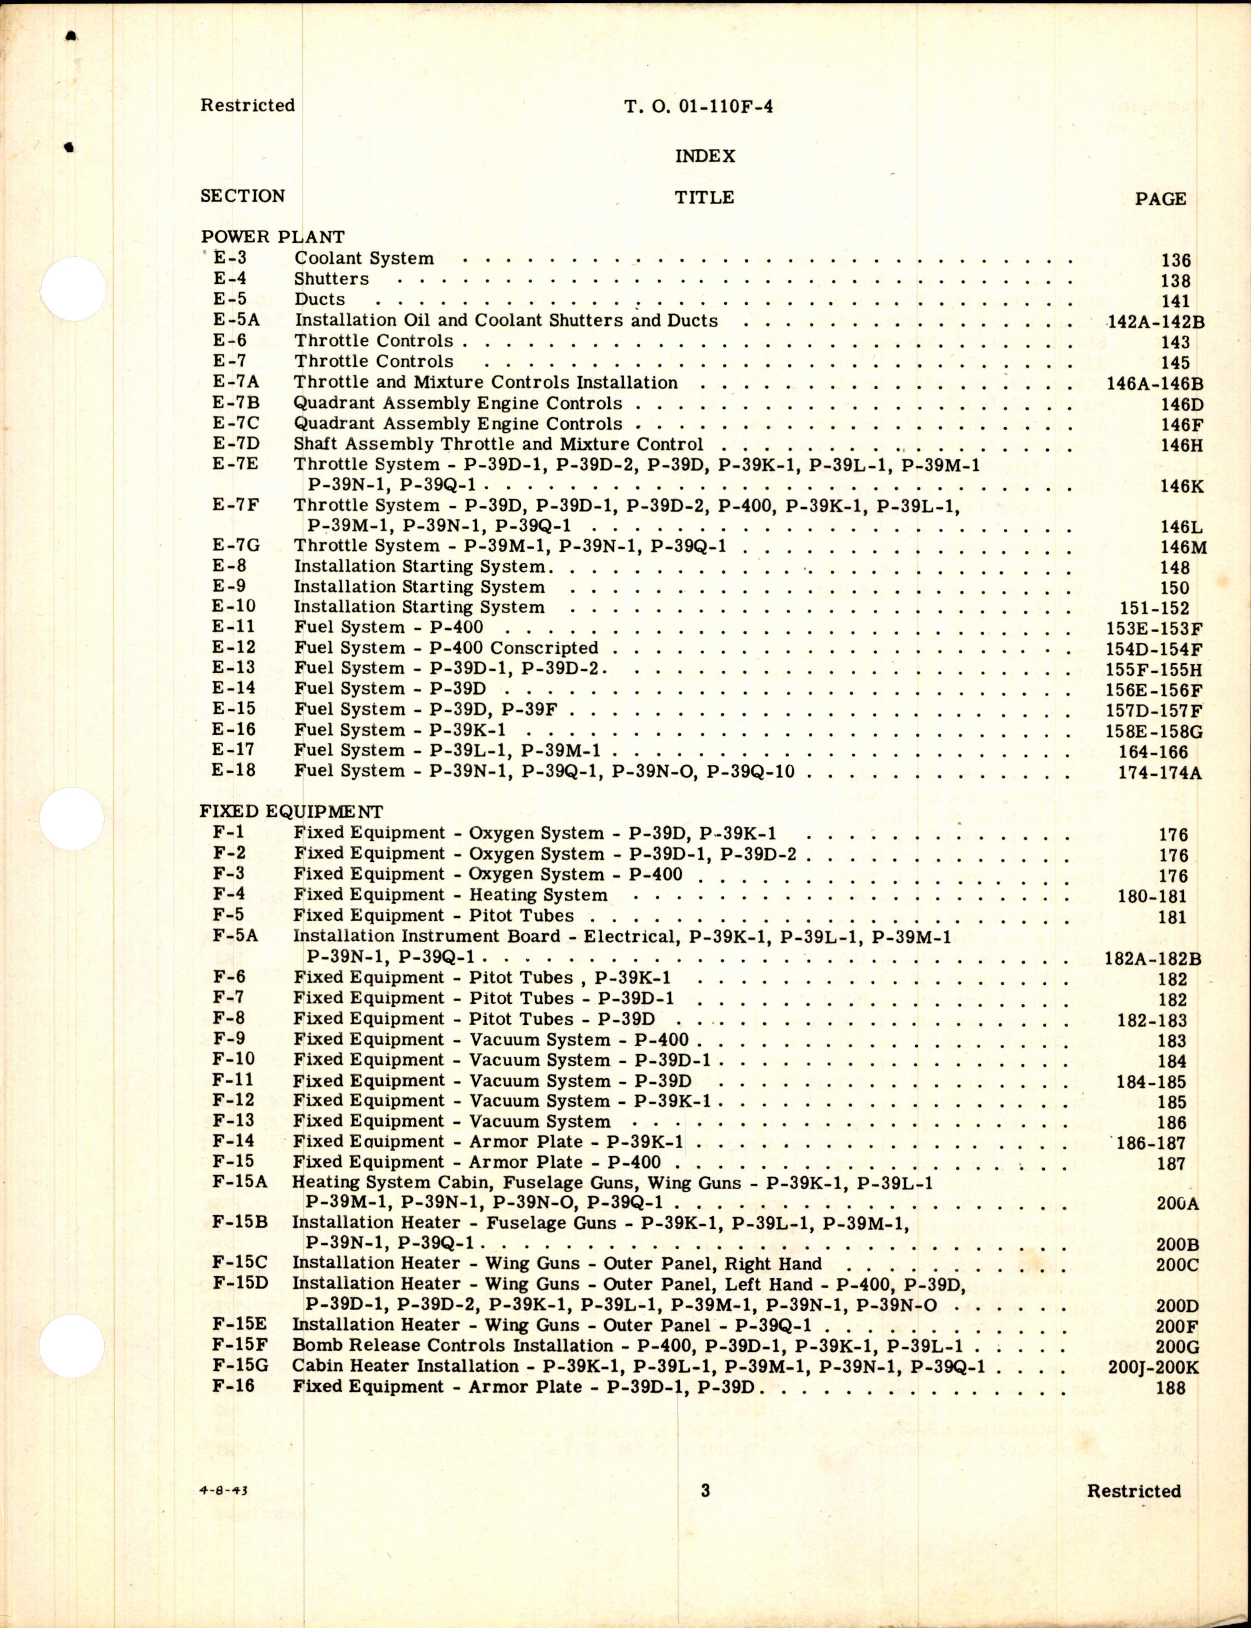 Sample page 5 from AirCorps Library document: Parts Catalog for the P-39